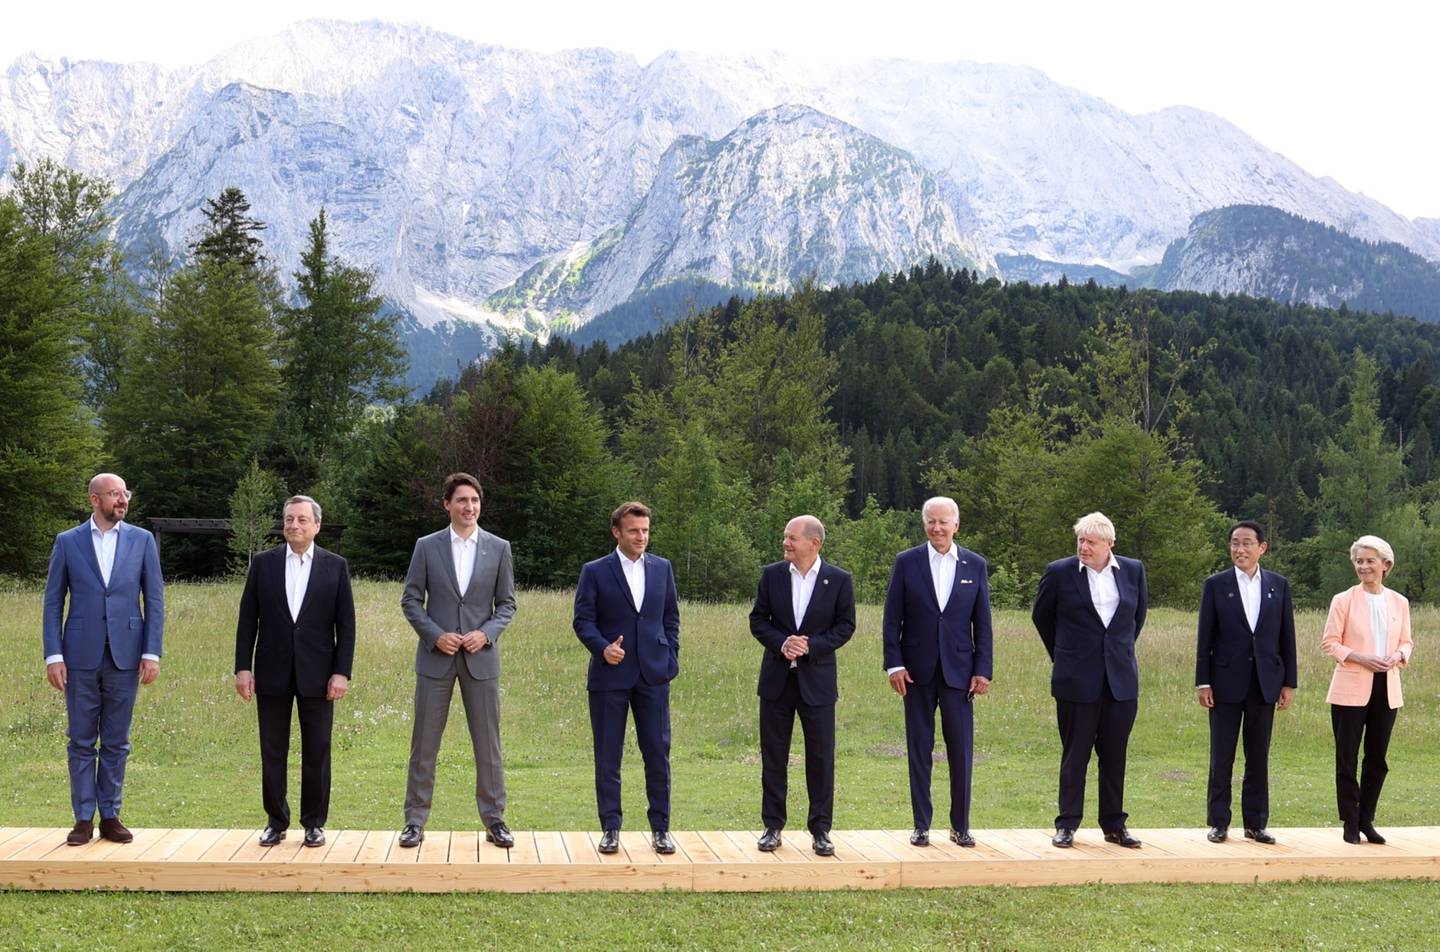 Leaders pose for their family photo during the G-7 Summit, at Elmau Castle, Germany, on June 26.